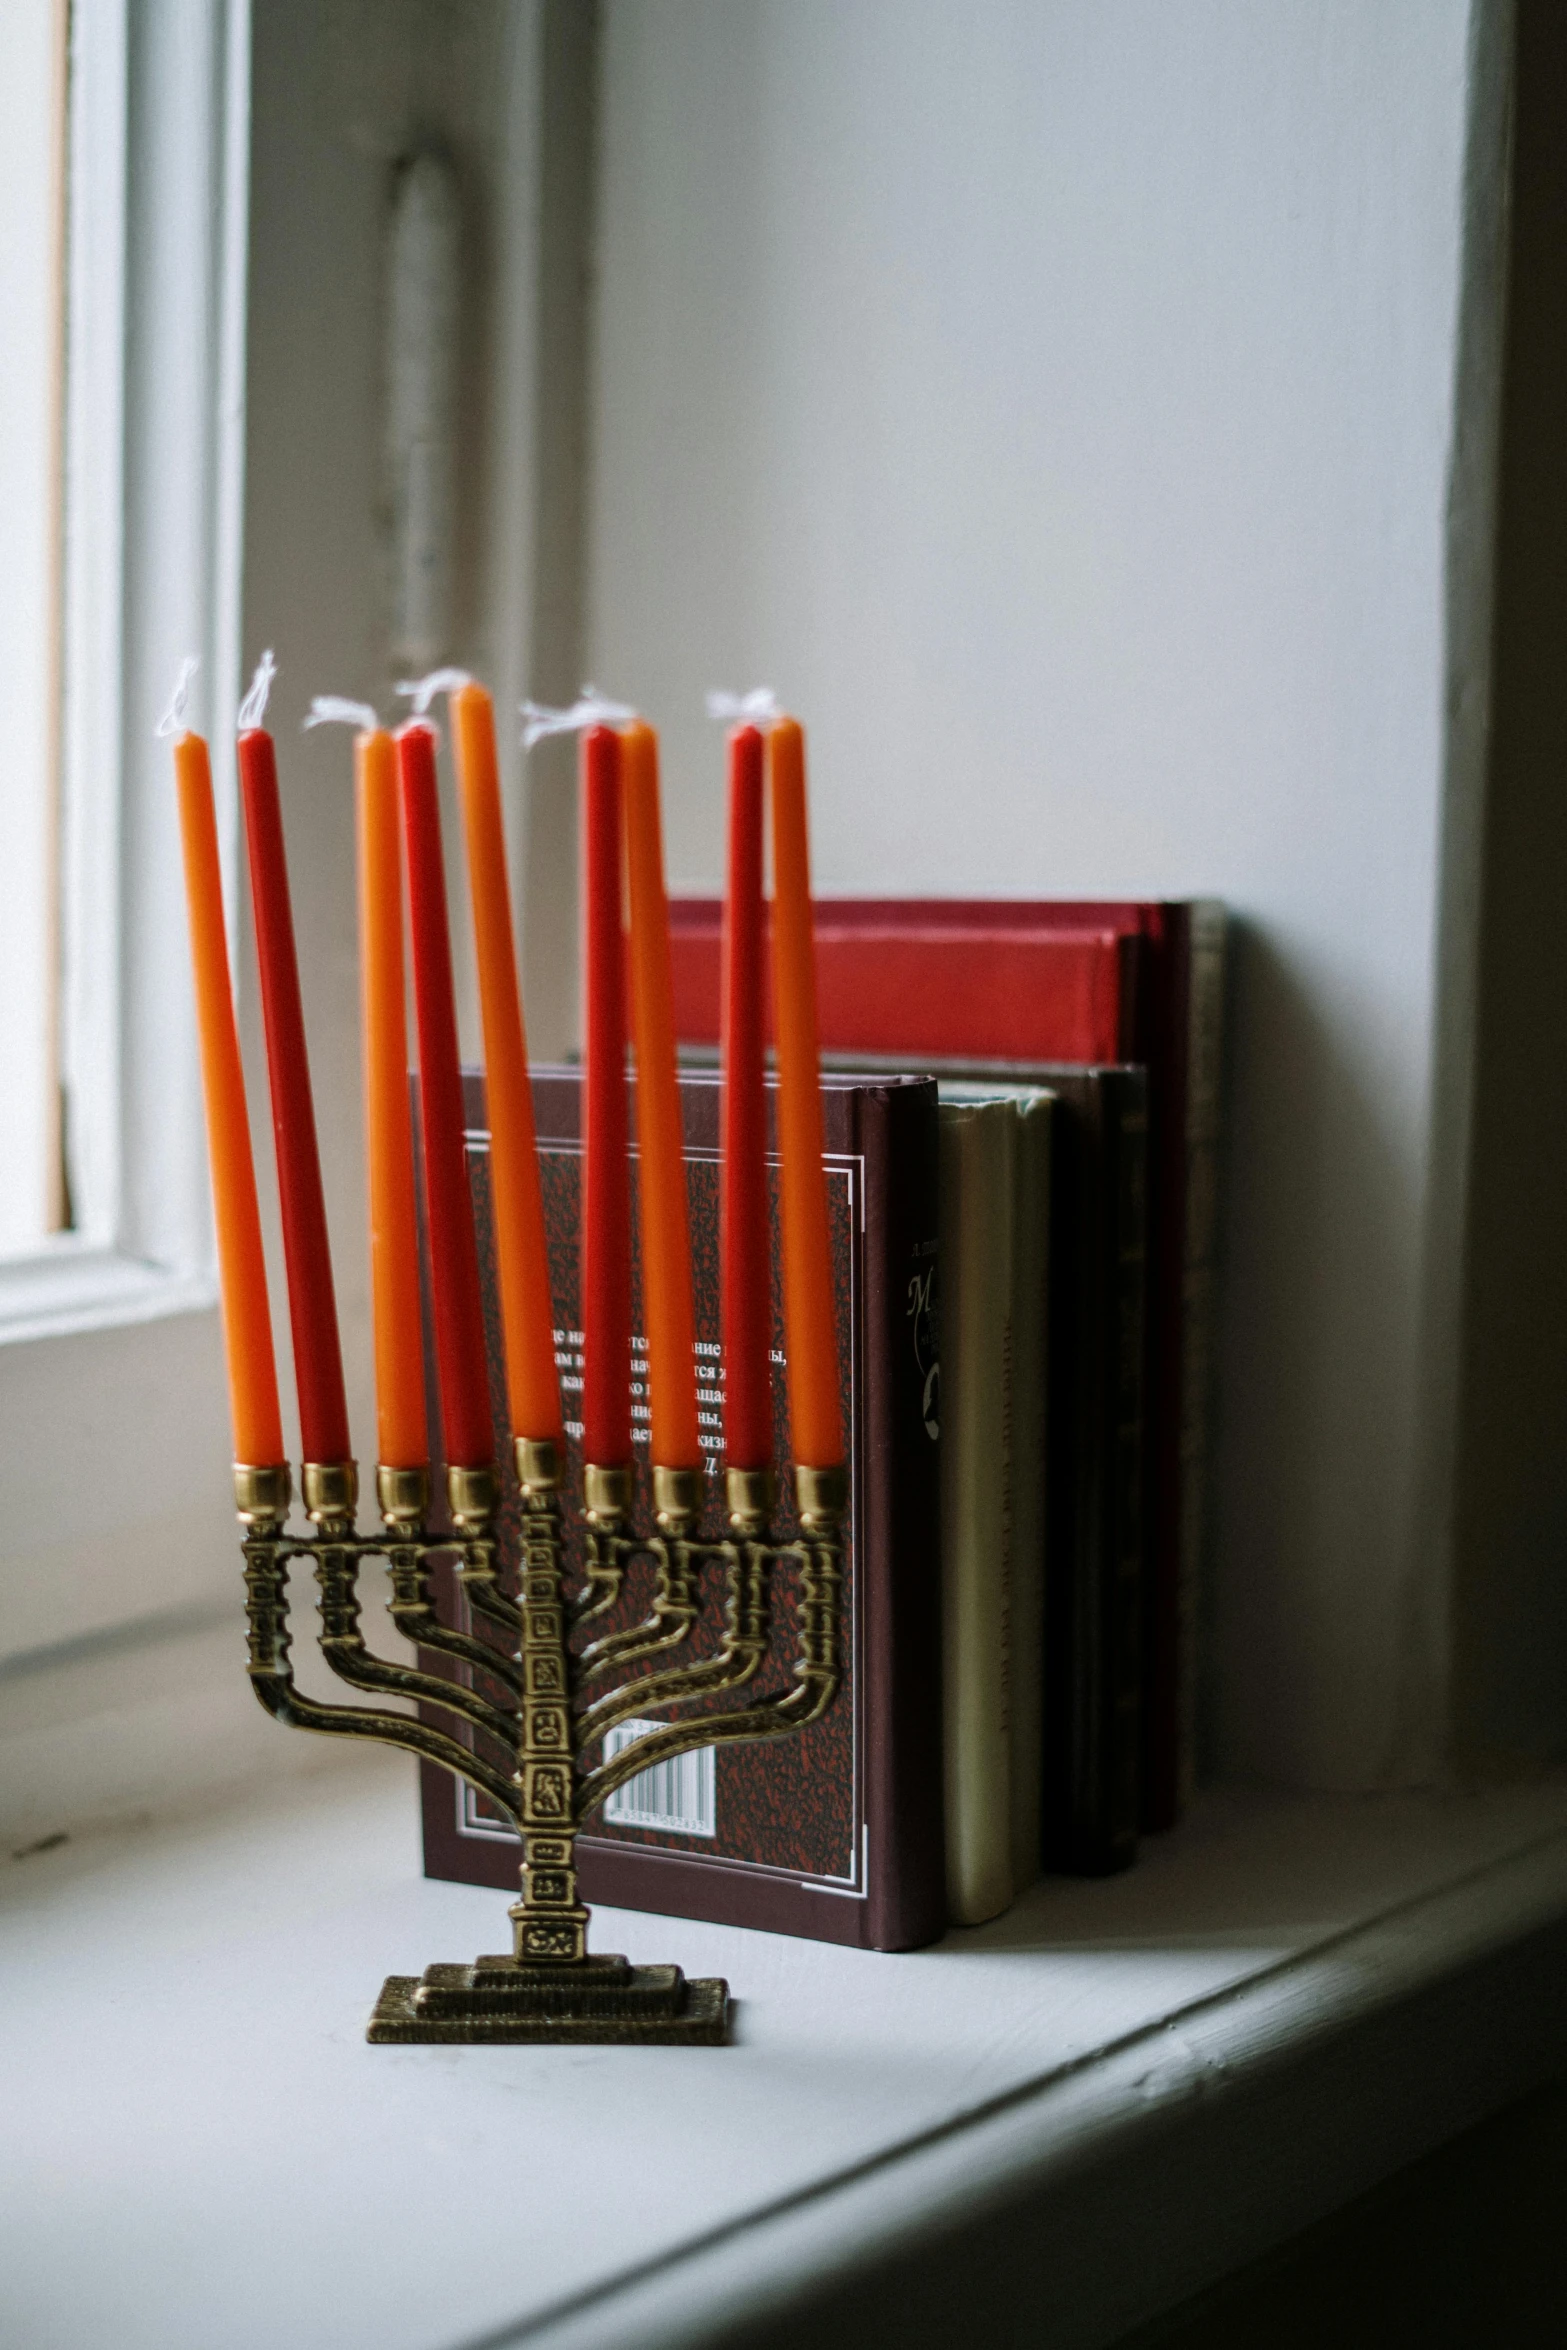 a group of candles sitting on top of a window sill, by Emanuel Witz, trending on unsplash, baroque, hebrew, orange lamp, ornate with gold trimmings, sleek spines